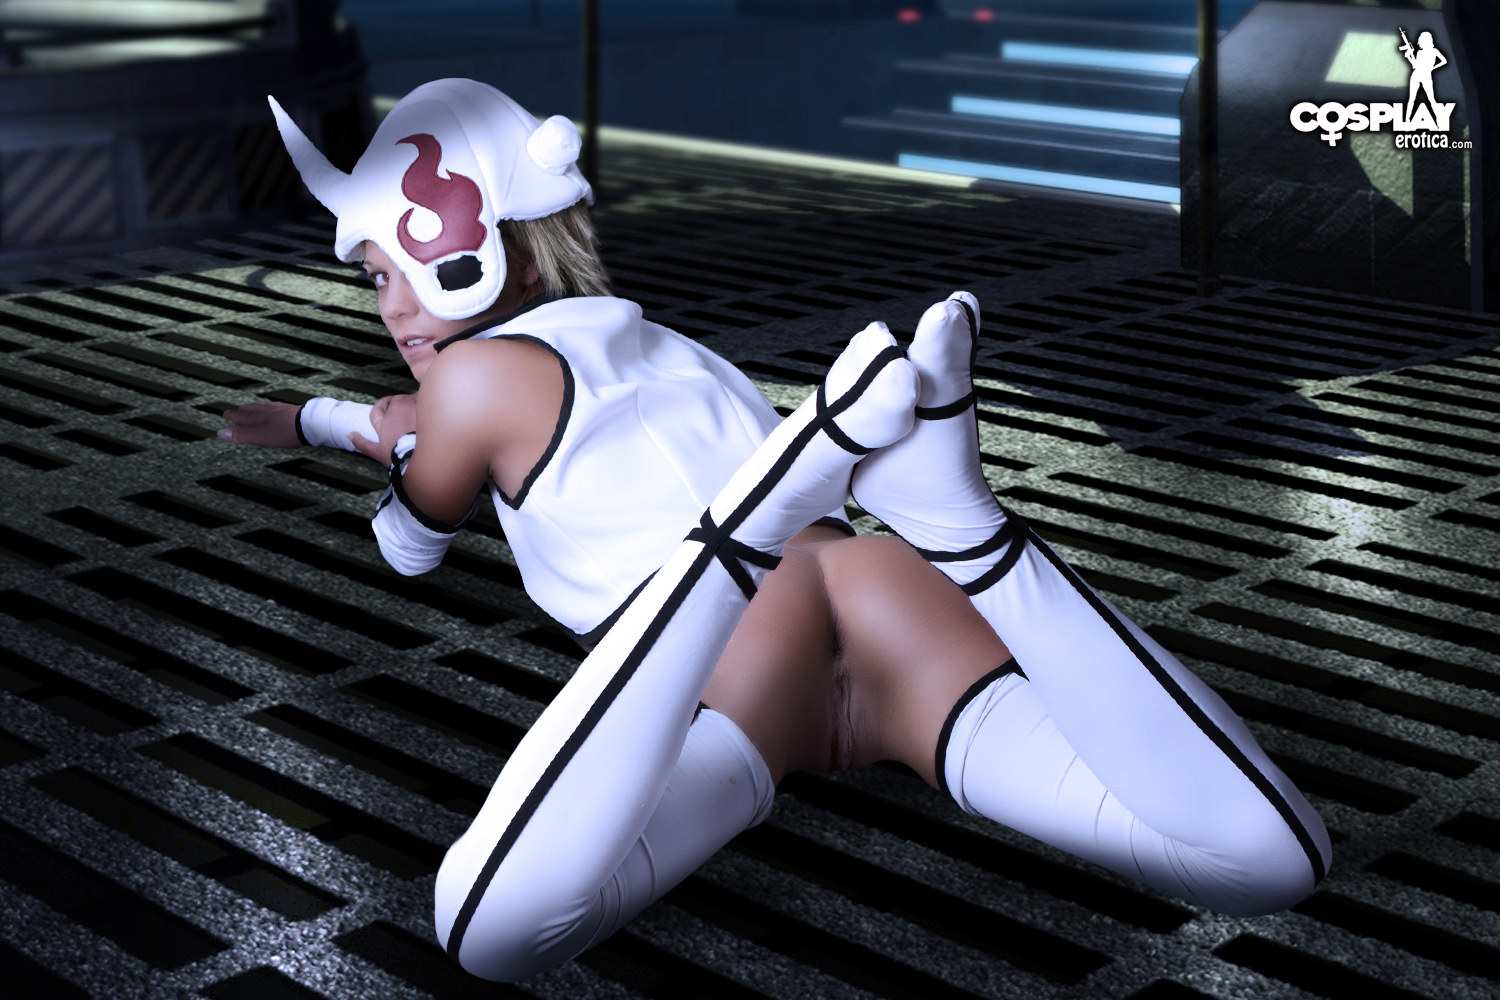 Melane - The Cutest Arrancar shows free gallery picture 42-42